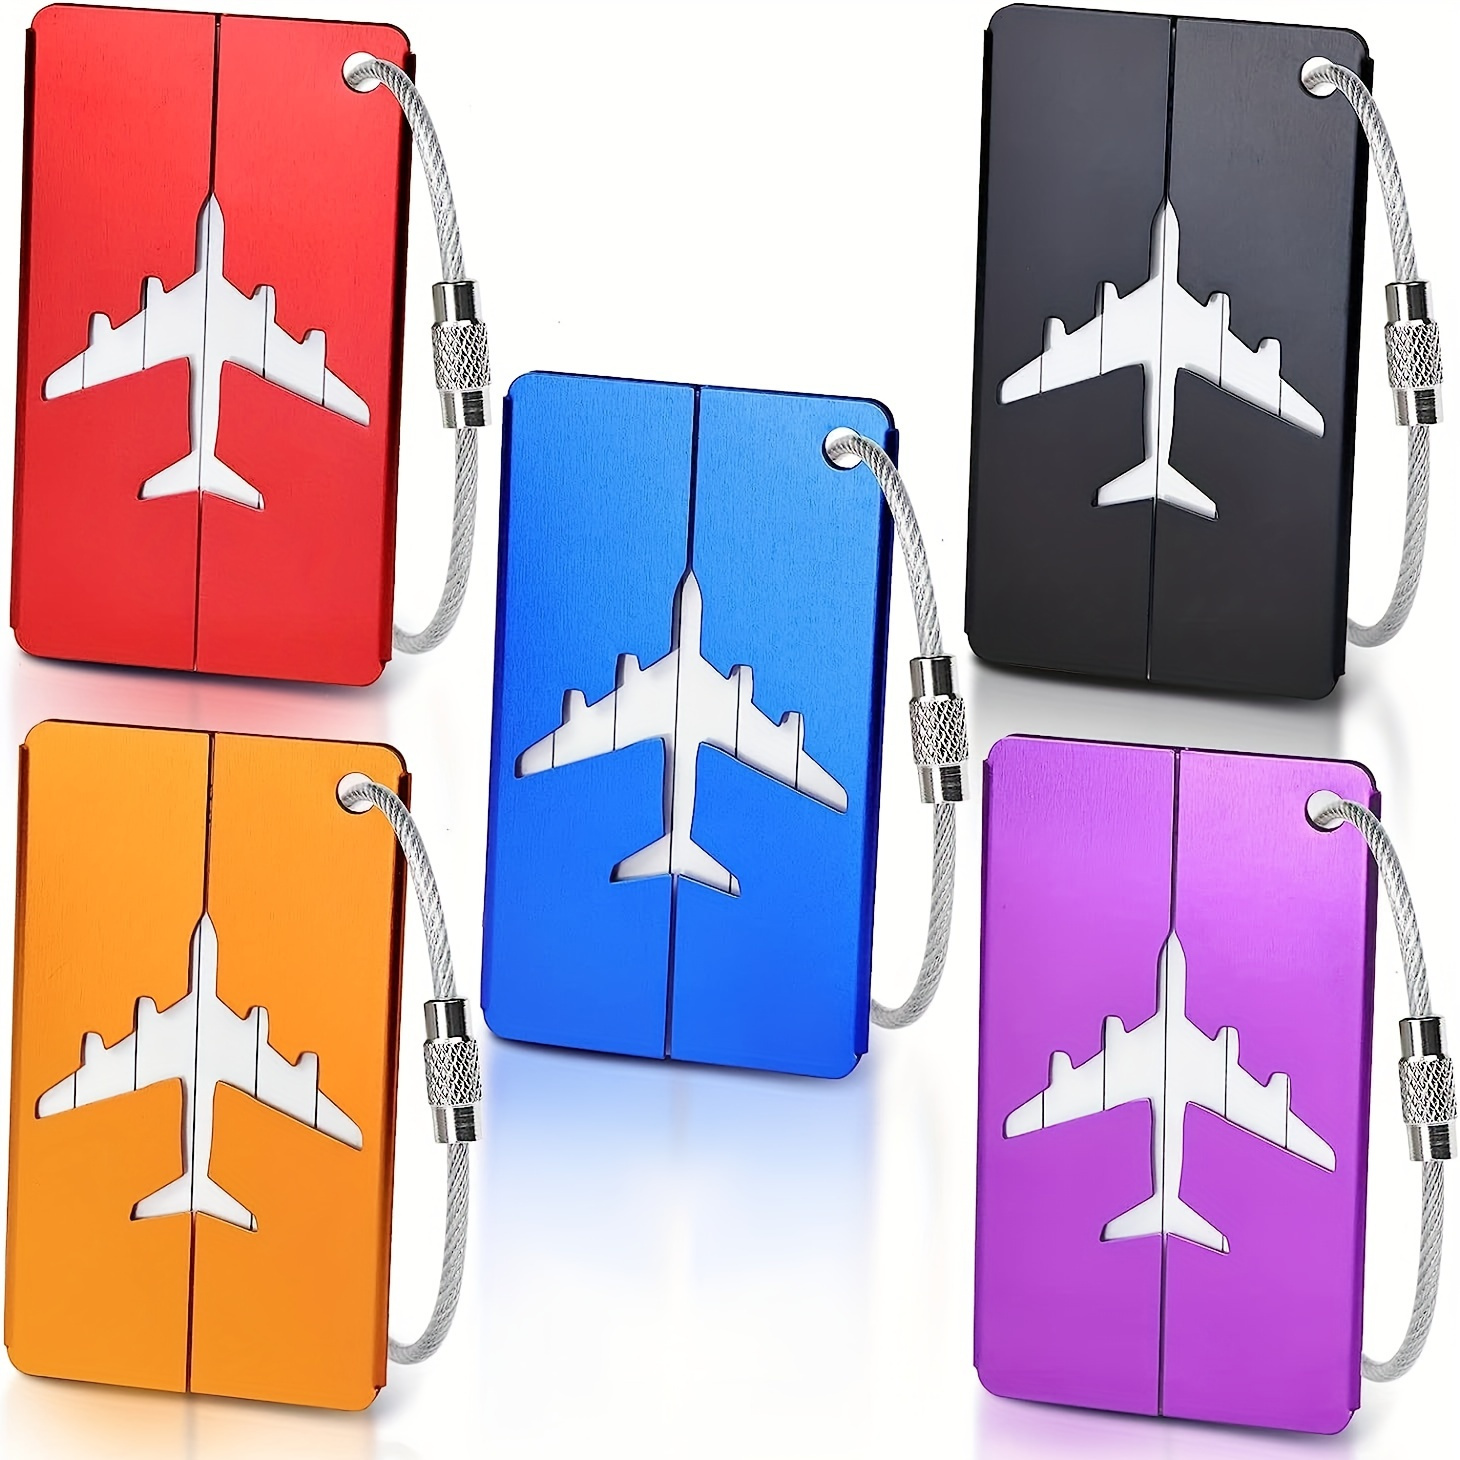 

5pcs Aluminum Alloy Luggage Tags Set, With Secure Steel Loop, Sturdy & Stylish, Perfect For Easy Identificationneeds